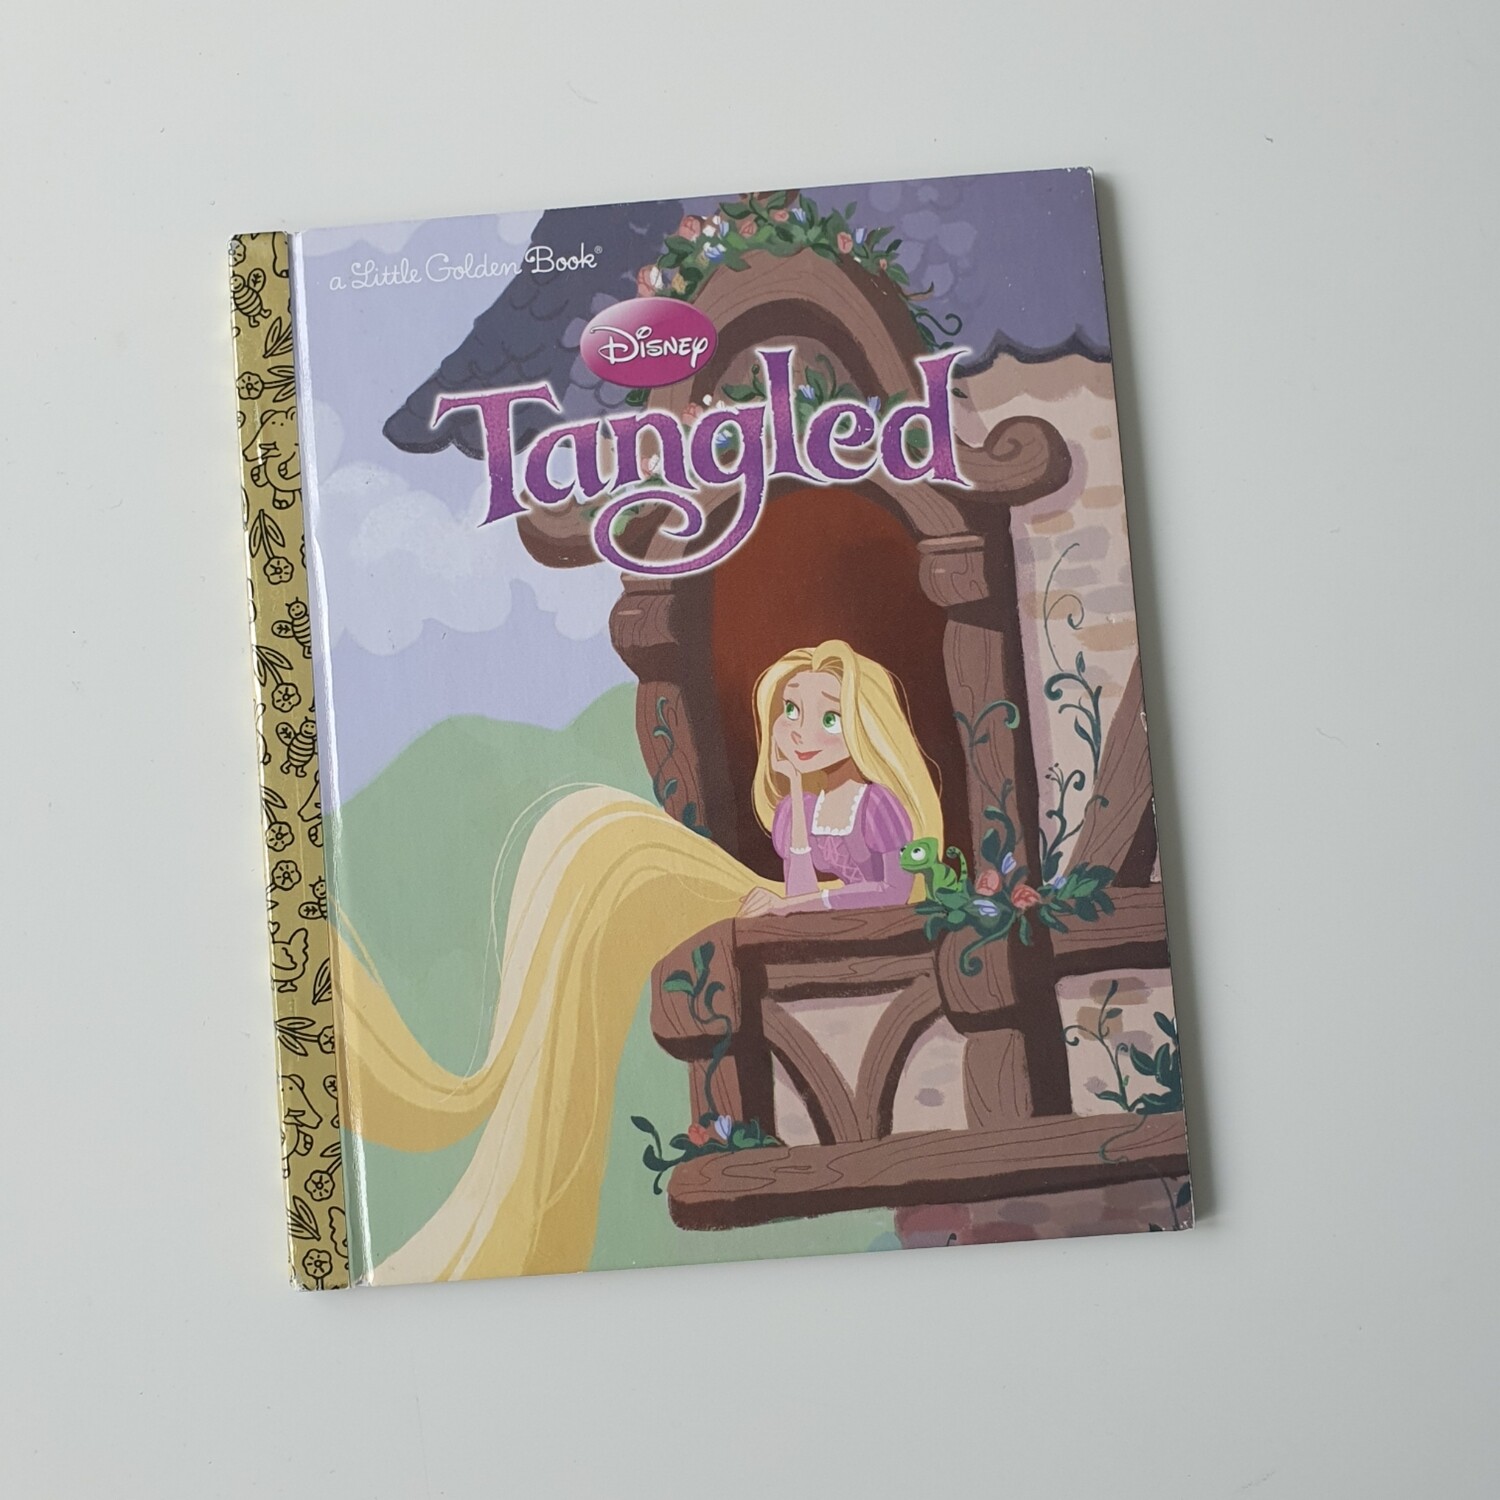 Tangled Notebook - board book will come with metal book corners included,